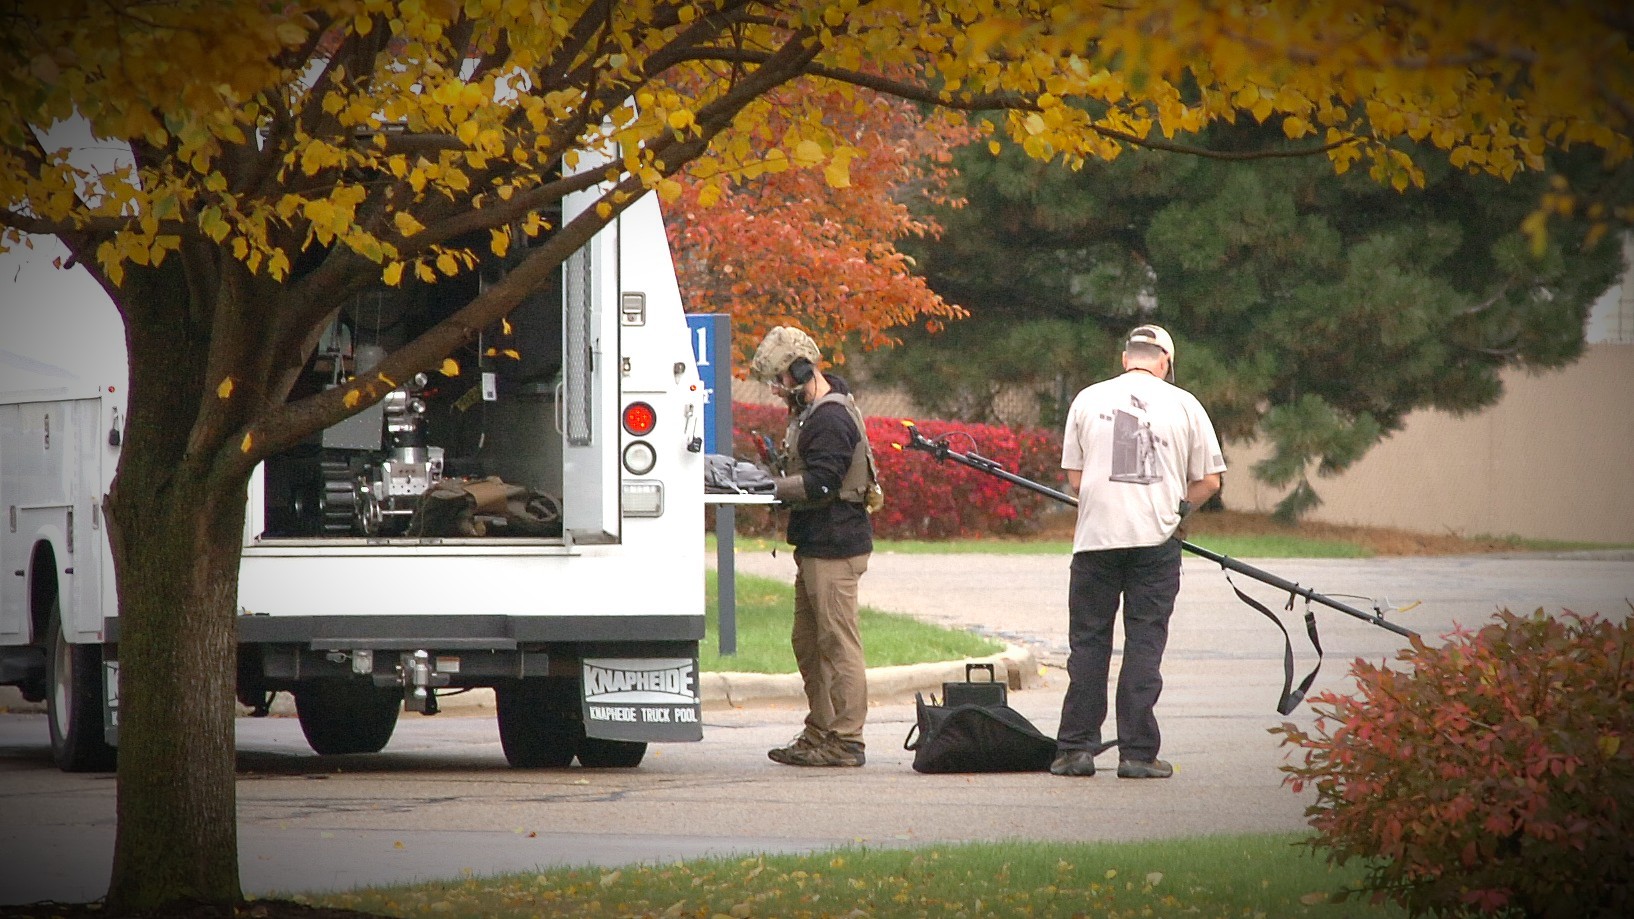 Members of the Dane County Bomb Squad prepare to enter Goodwill to remove a possible explosive device found among donated items. JNR photo by Dan Plutchak